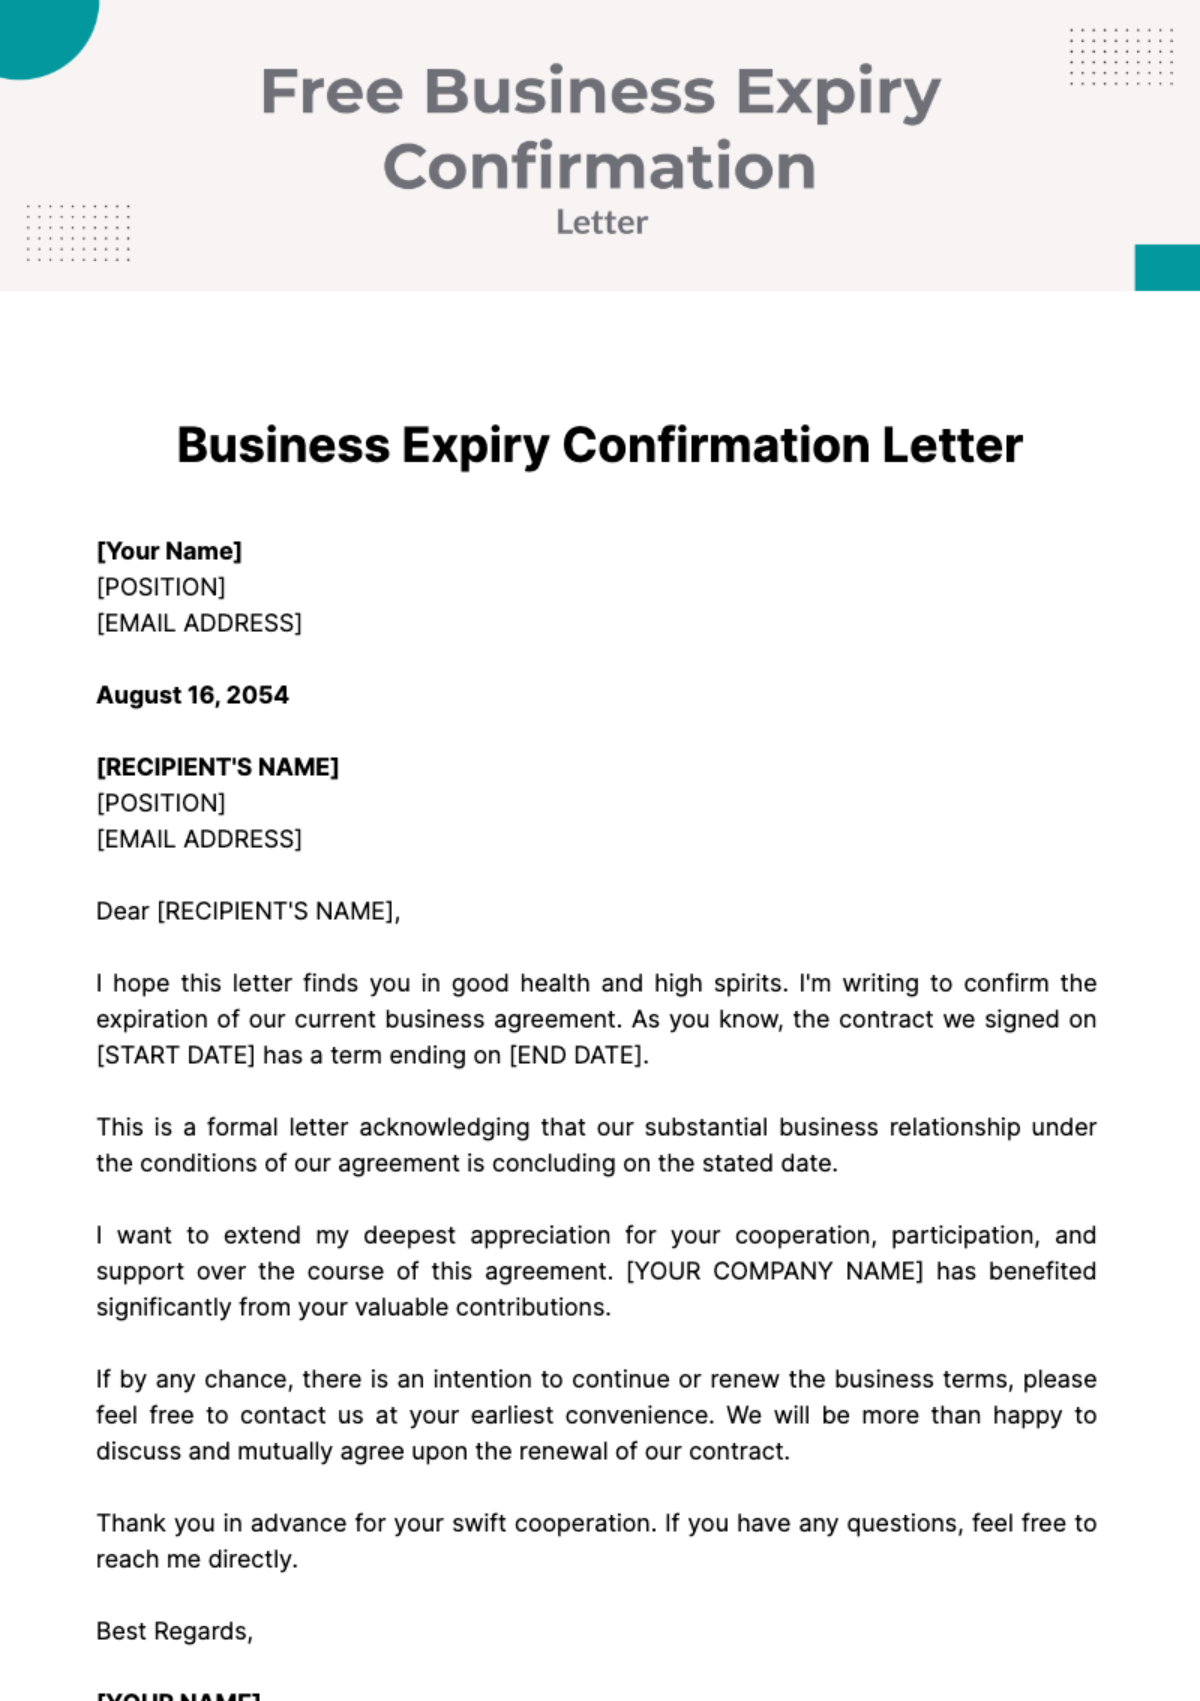 Business Expiry Confirmation Letter Template